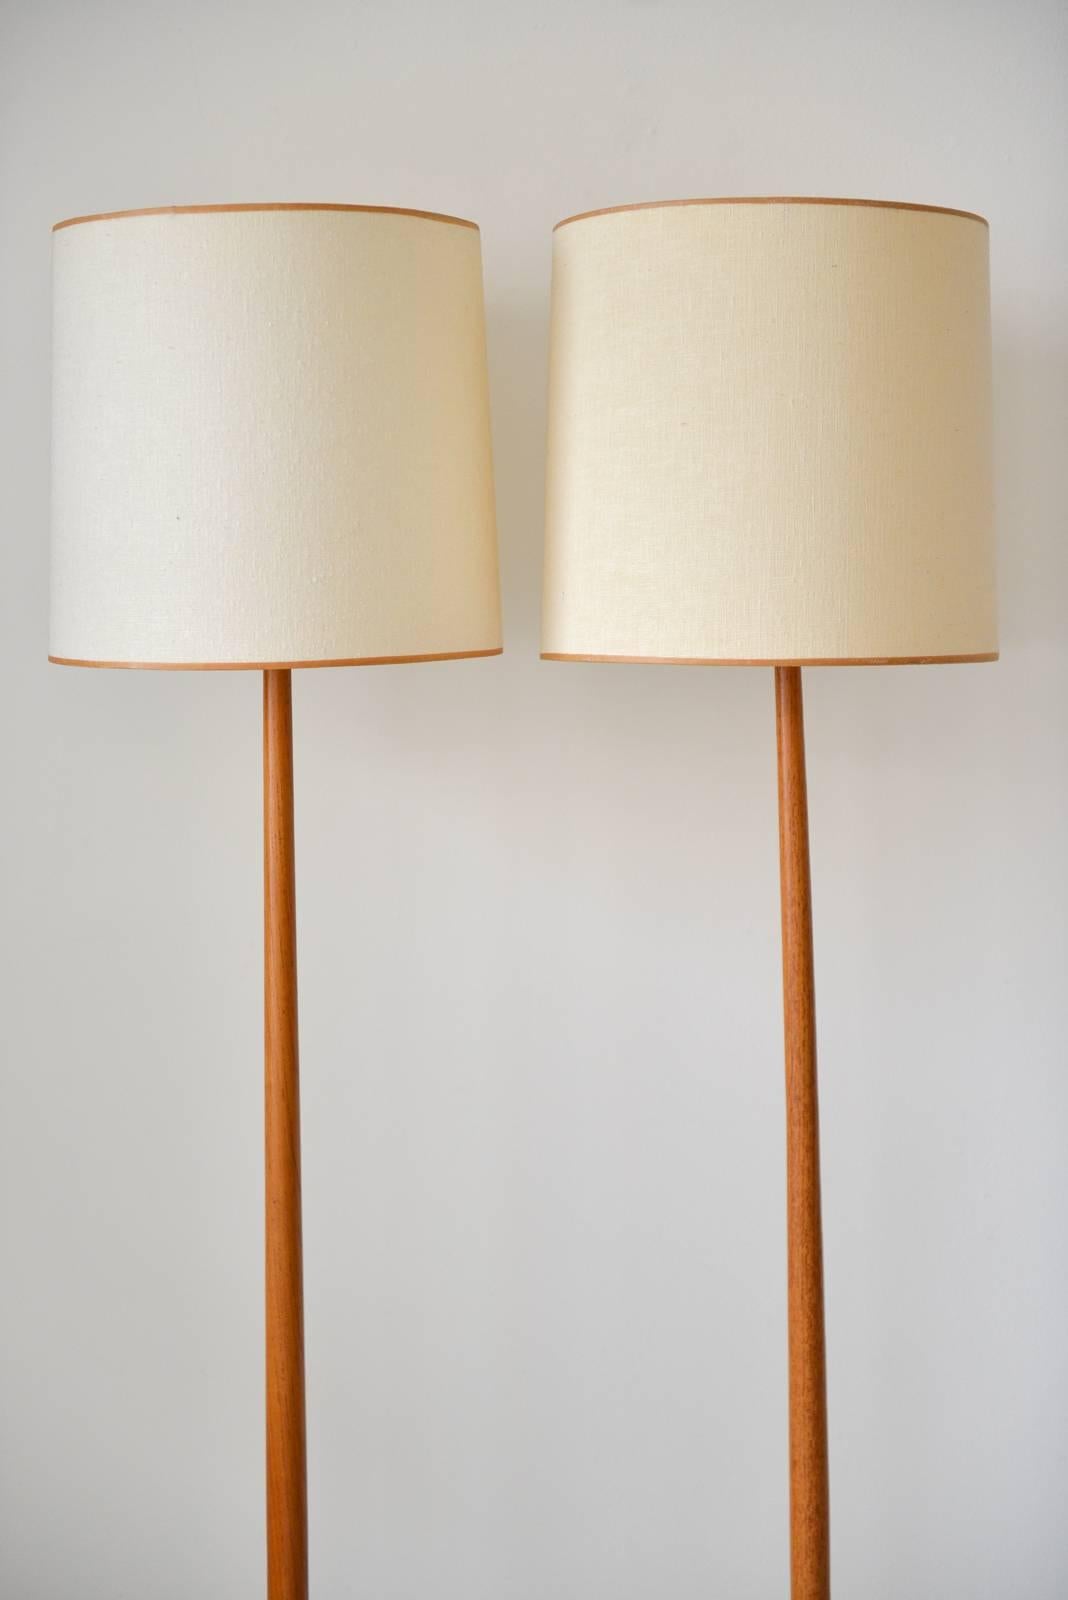 Pair of Swedish teak floor lamps for George Kovacs, circa 1960. Original shades with tan piping and original cords. Signed on underside with Made in Sweden label and Kovacs stamp. Excellent original condition. 

Can be seen in our showroom at MODERN